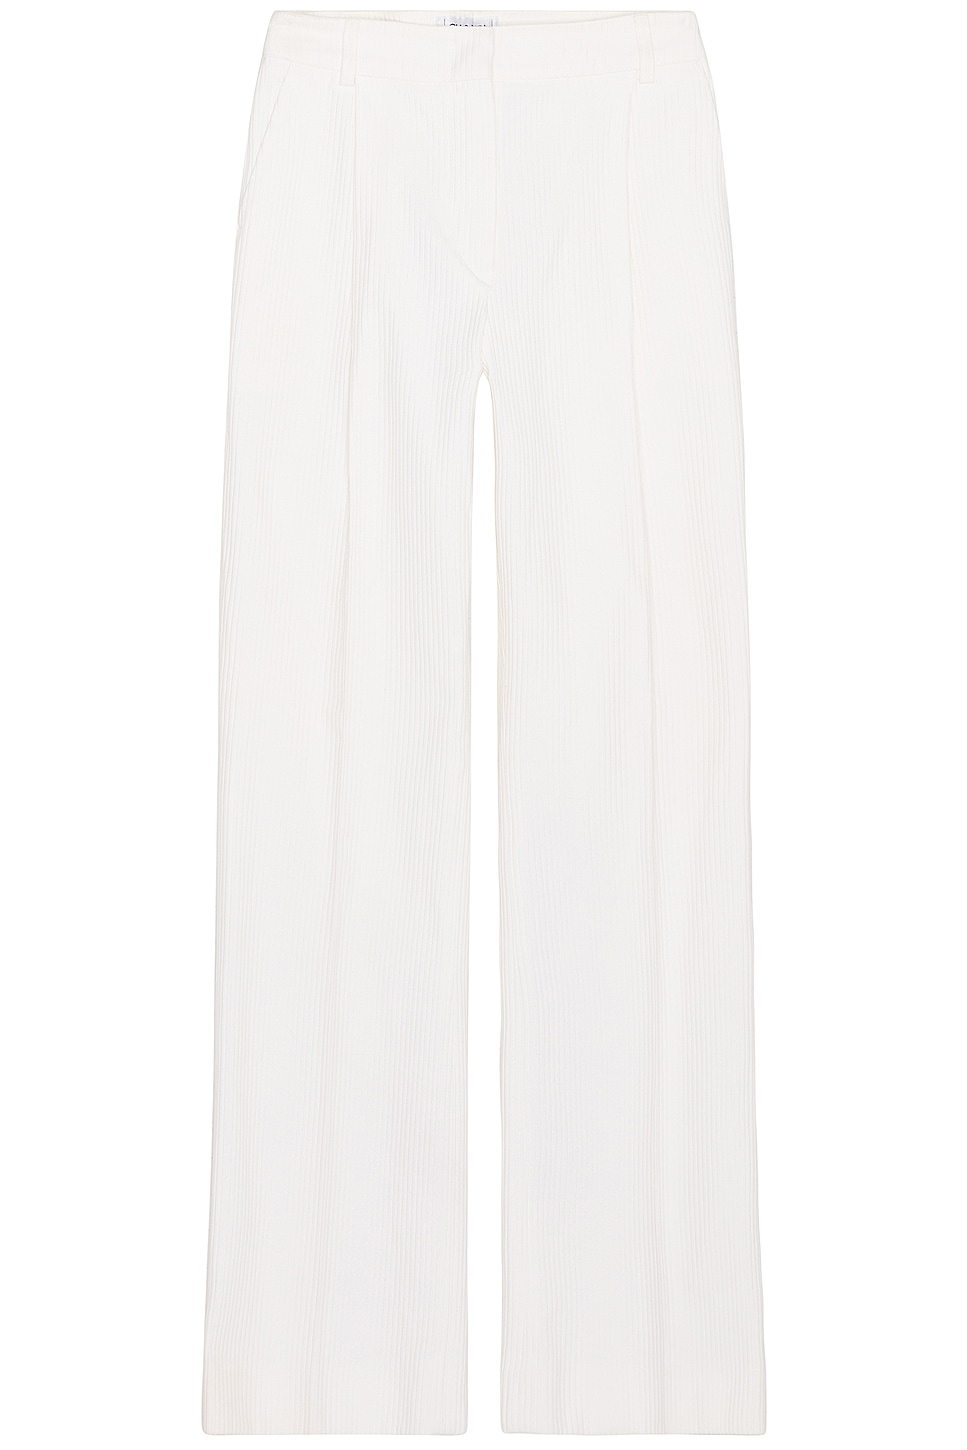 Image 1 of FWRD Renew Chanel 2001 Wide Leg Pants in Ivory